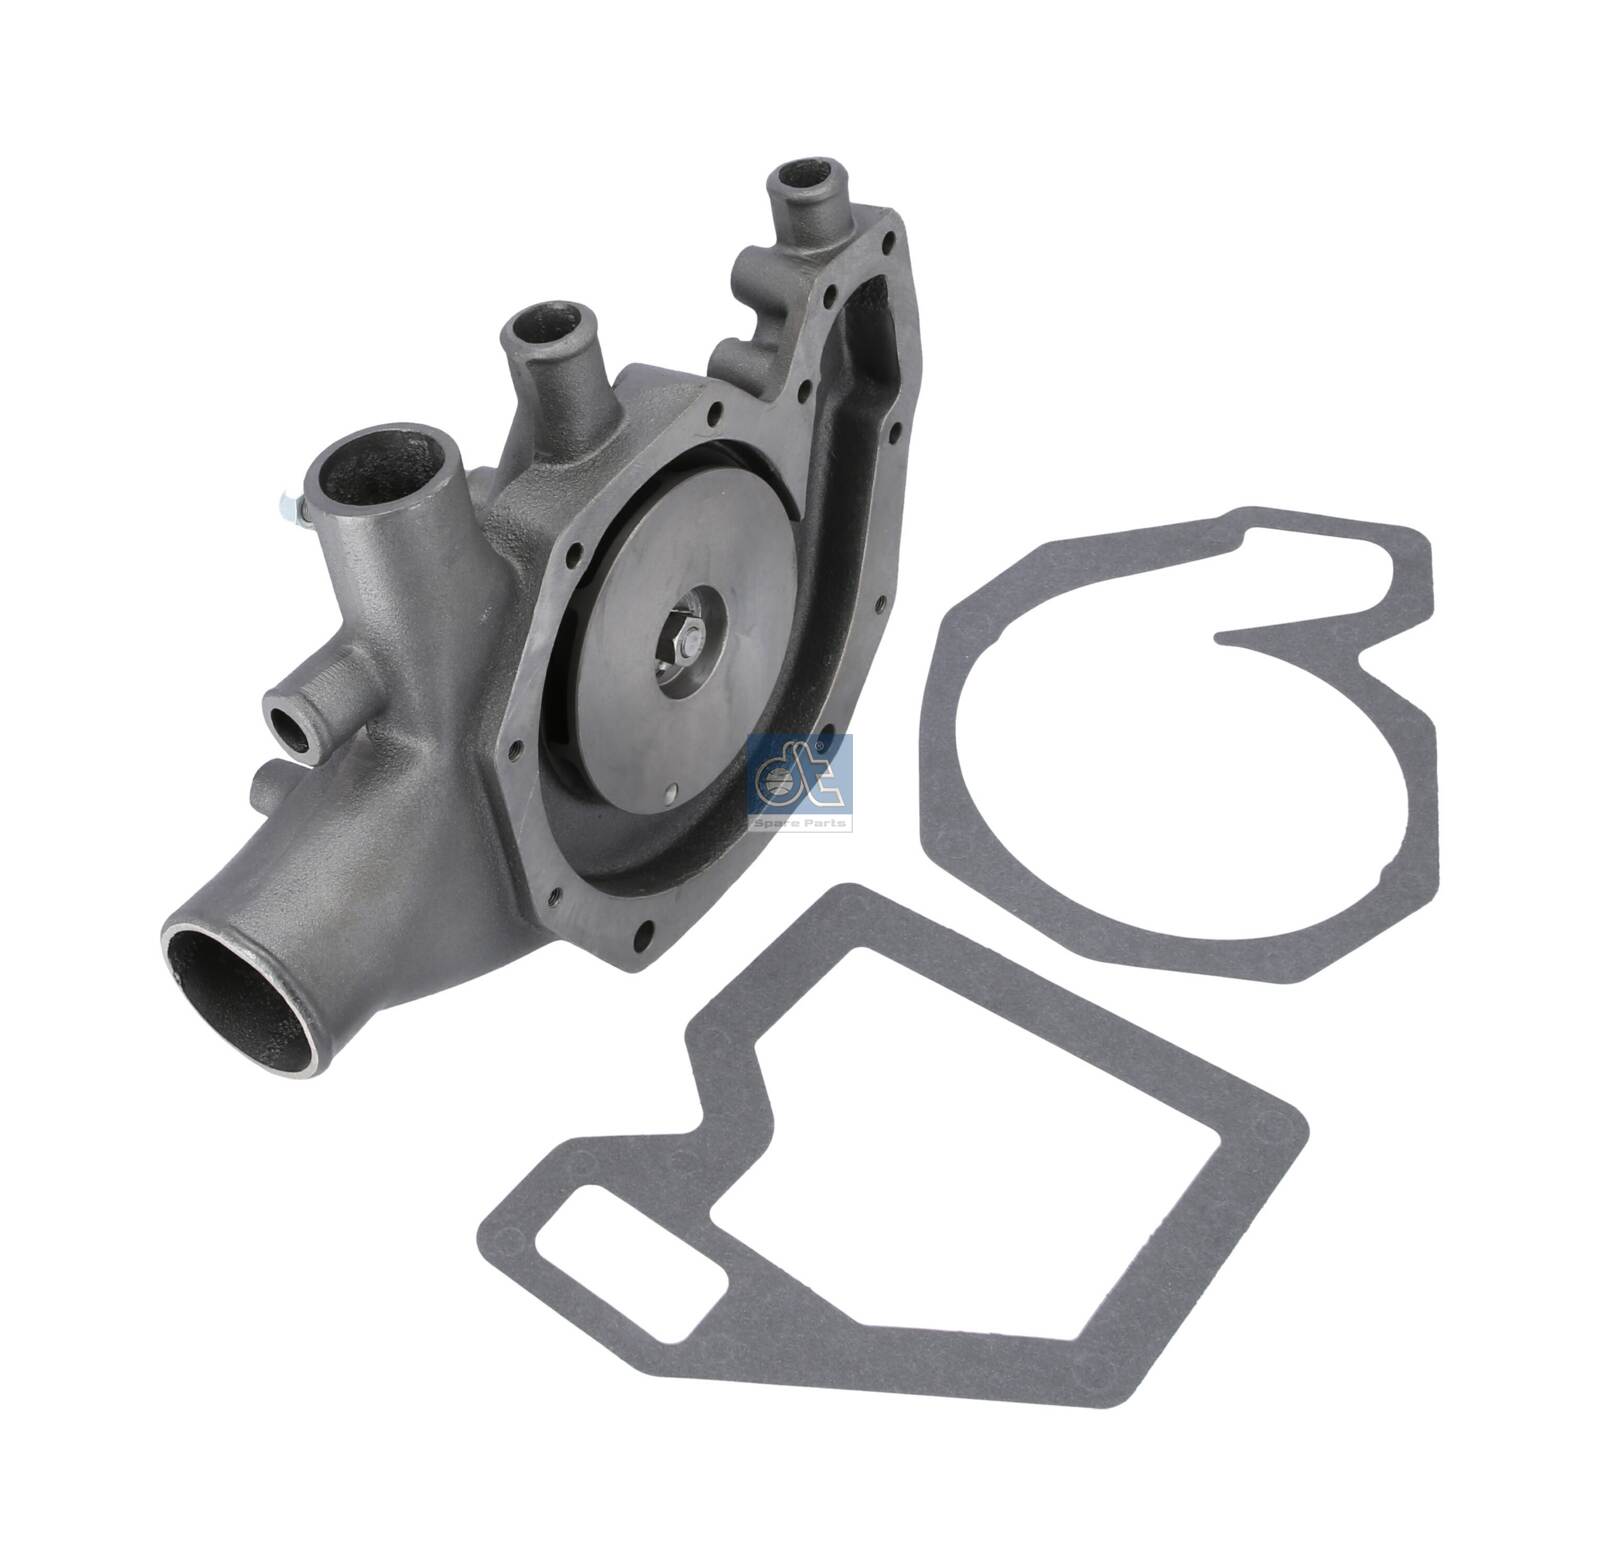 5.41002, Water Pump, engine cooling, DT Spare Parts, Daf F2800/F3200/F3300/F3600 DKA1160 DKTD1160 DKZ1160 1985+, 0288619, 0506109, 0516724, 0517097, 0682260, 0682260A, 0682260R, 288619, 506109, 516724, 517097, 682260, 682260A, 682260R, 01500001, 062000116000, 100.153-00A, 12.350.025, 14-330682260, 19200100, 20160911600, 220719, 24-1293, 44465, 57776, 8MP376809-204, CP536000S, DP099, 053.013, 20.1609.11600